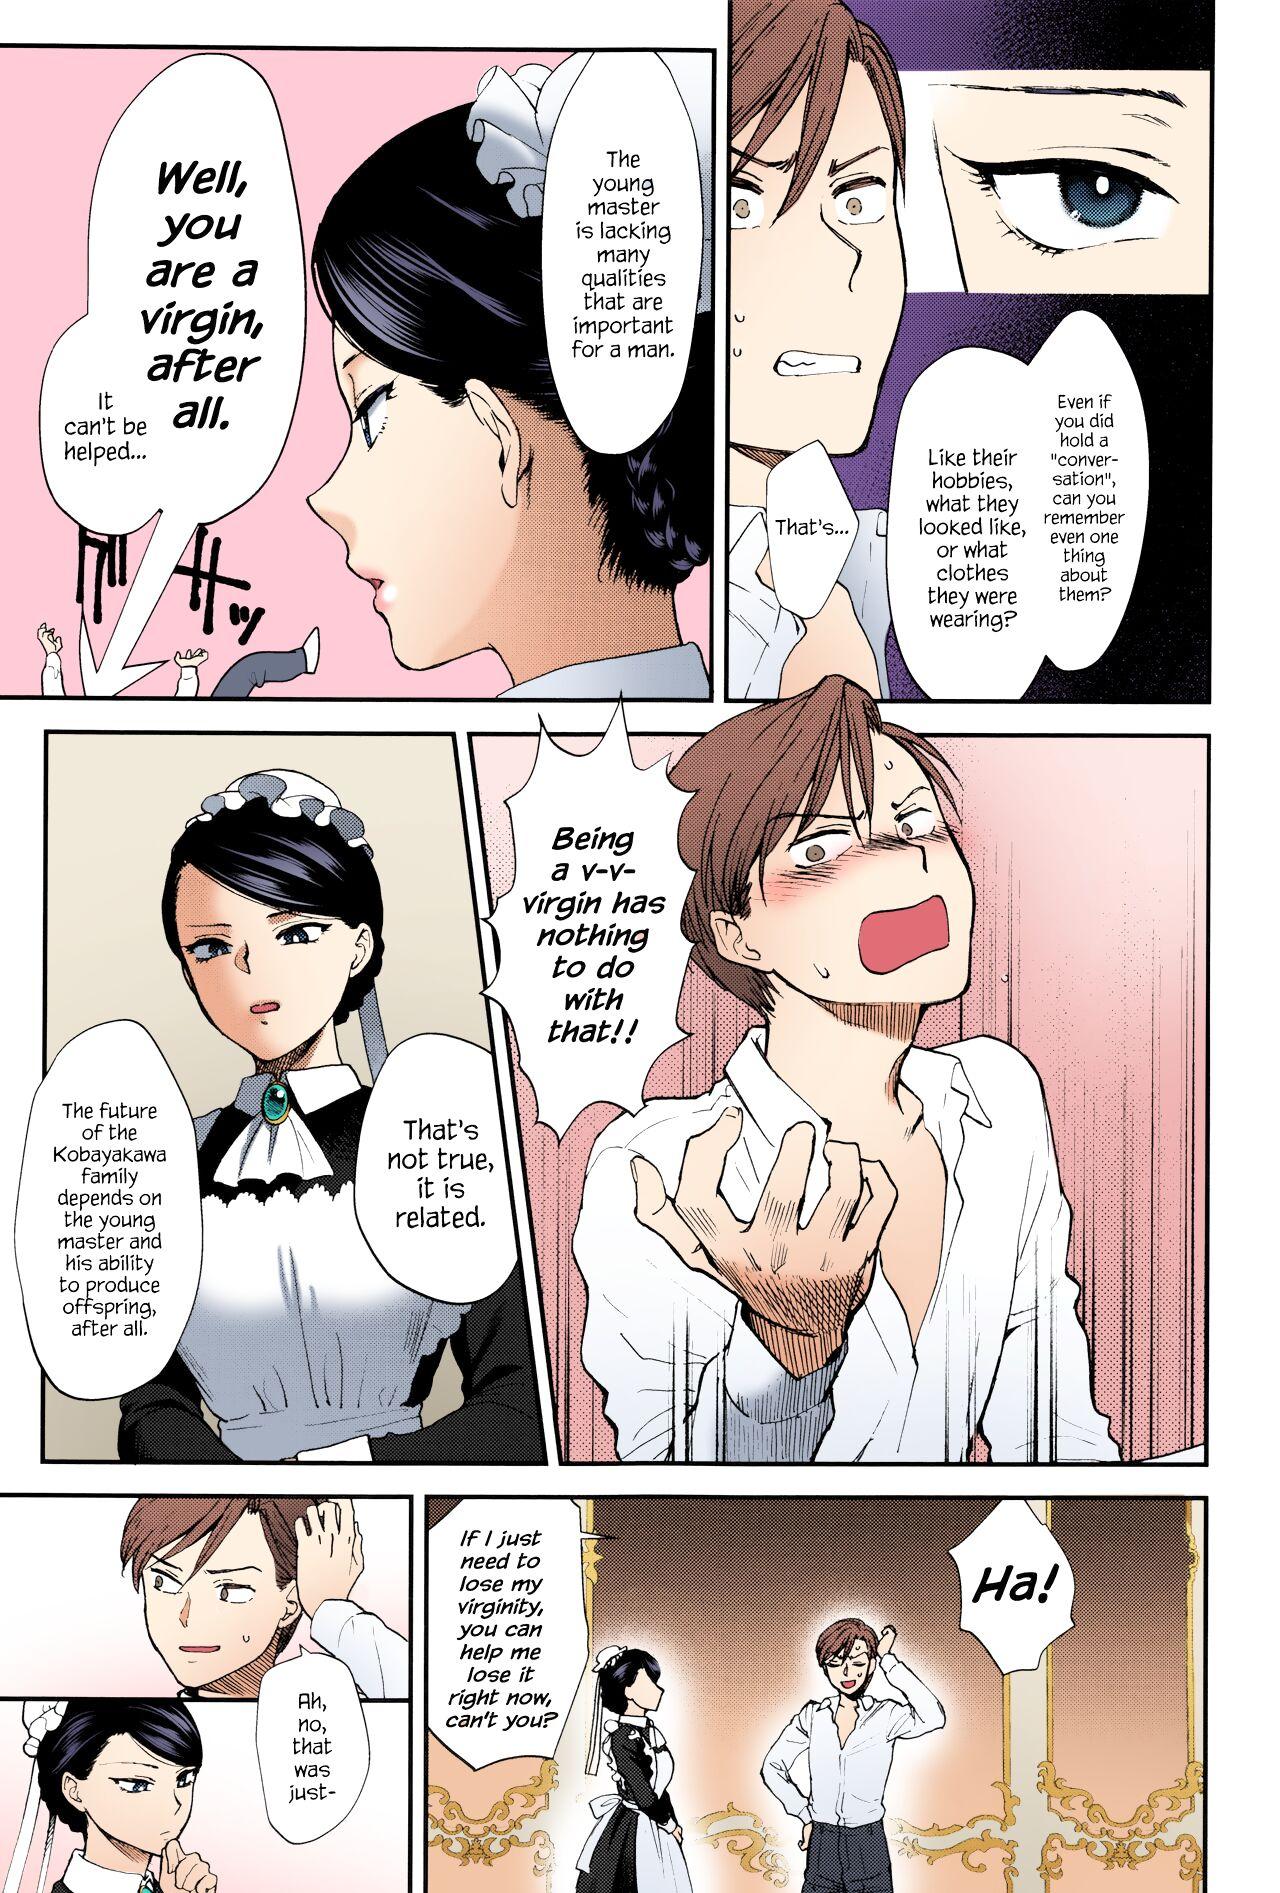 Esposa Kyoudou Well Maid - The Well “Maid” Instructor - Original Wanking - Page 5